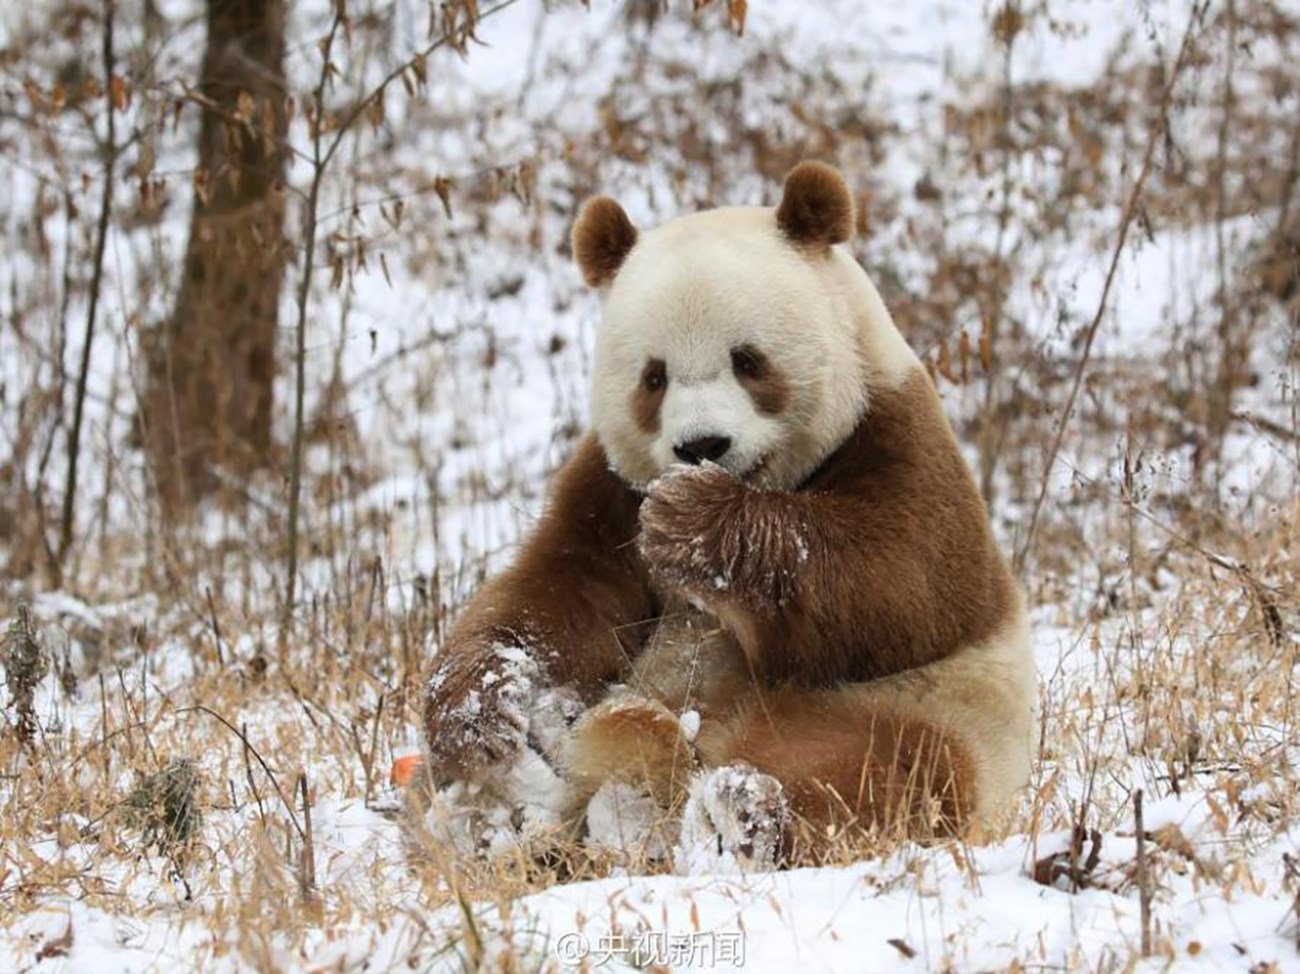 Qizai, who was found in the wild as a cub, is the world’s only brown panda living in captivity. Photo: Weibo / CCTV